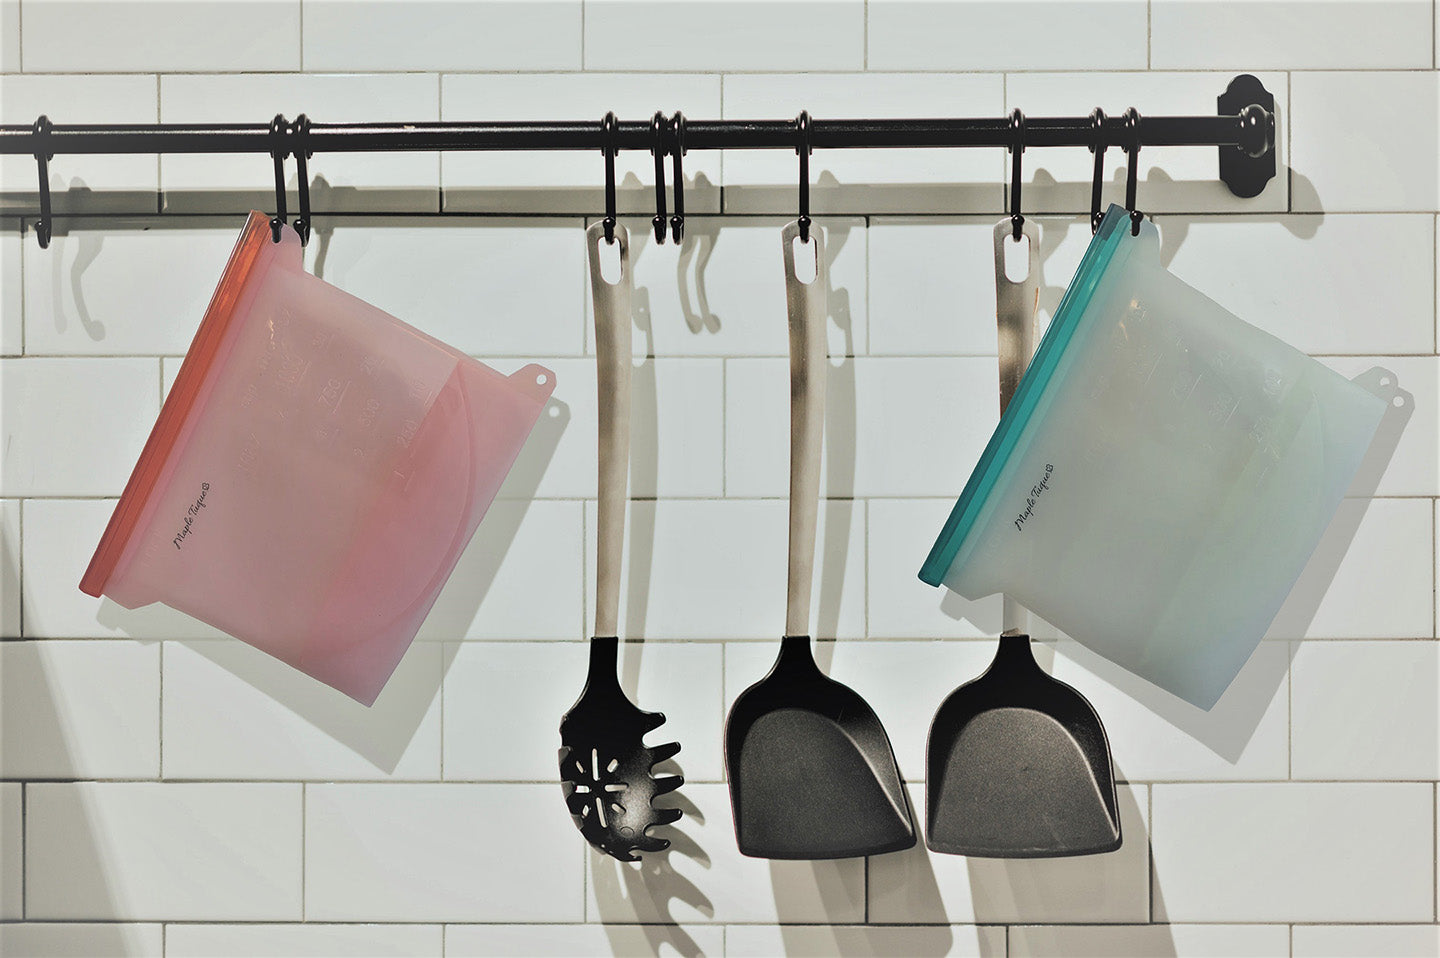 Reusable Silicone Food Bags Capacity: 1L Silicone bags hanging on hooks with kitchen utensils.